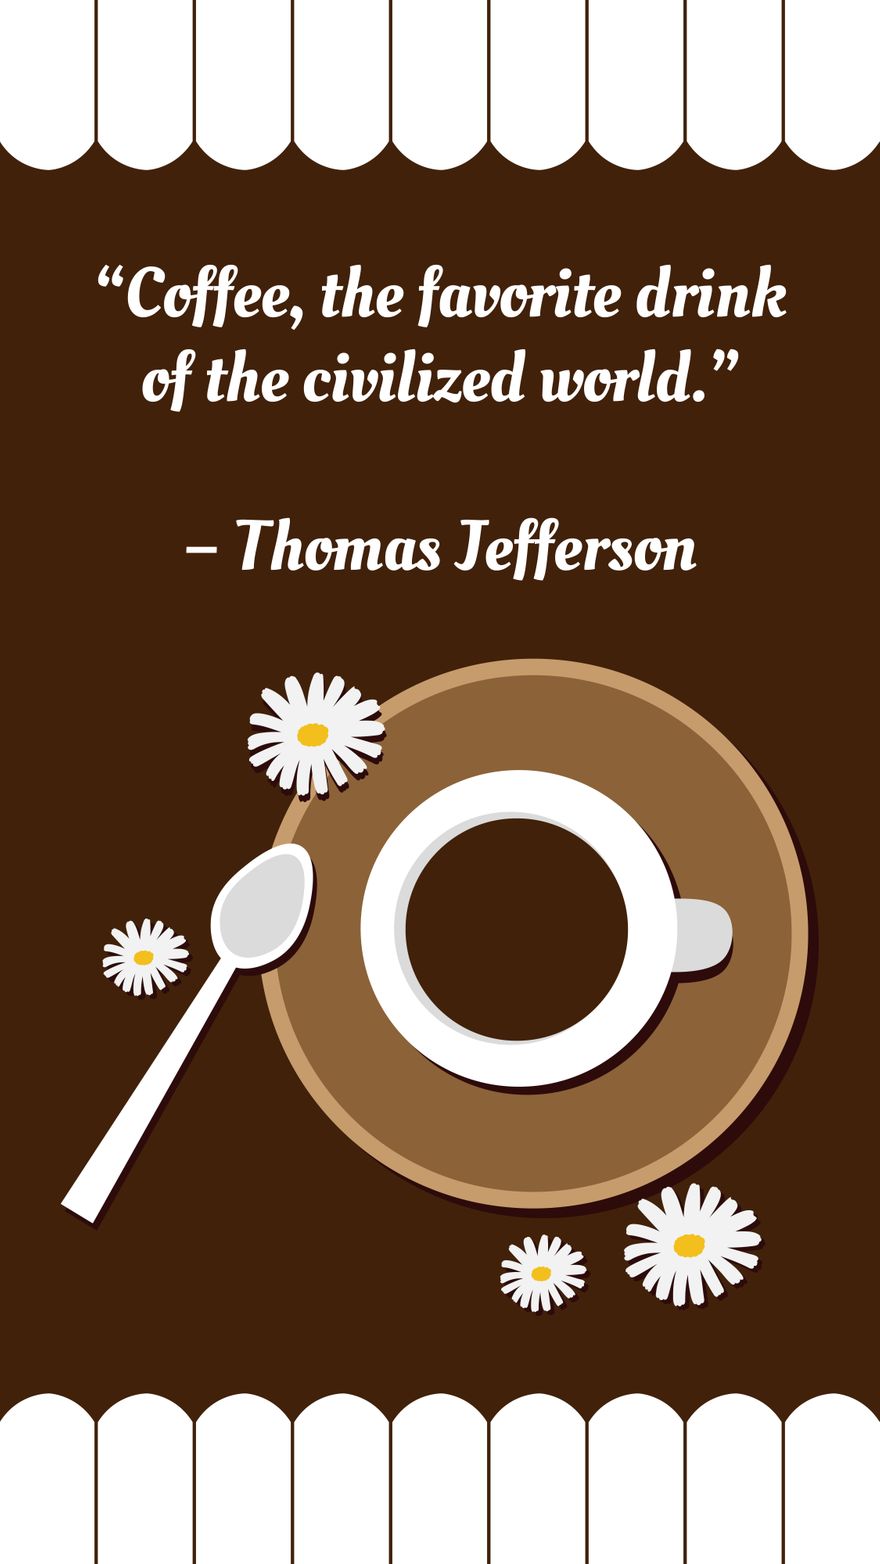 Free Coffee Quote in Illustrator, JPG